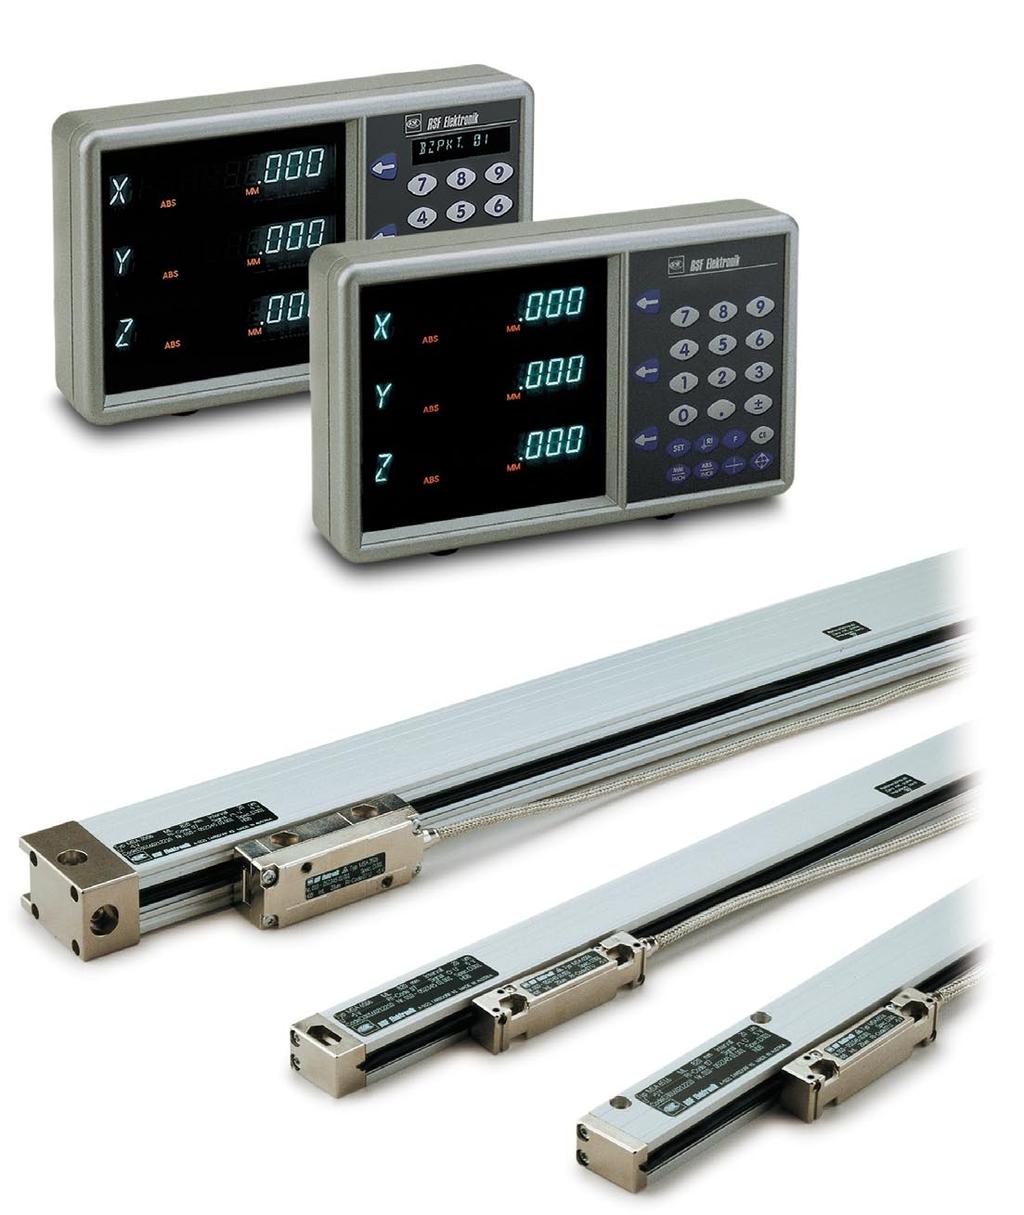 Digital Readouts Z 710, Z 720, Z 730, Z 715, Z 725, Z 735 RSF Digital Readouts are easy to use.